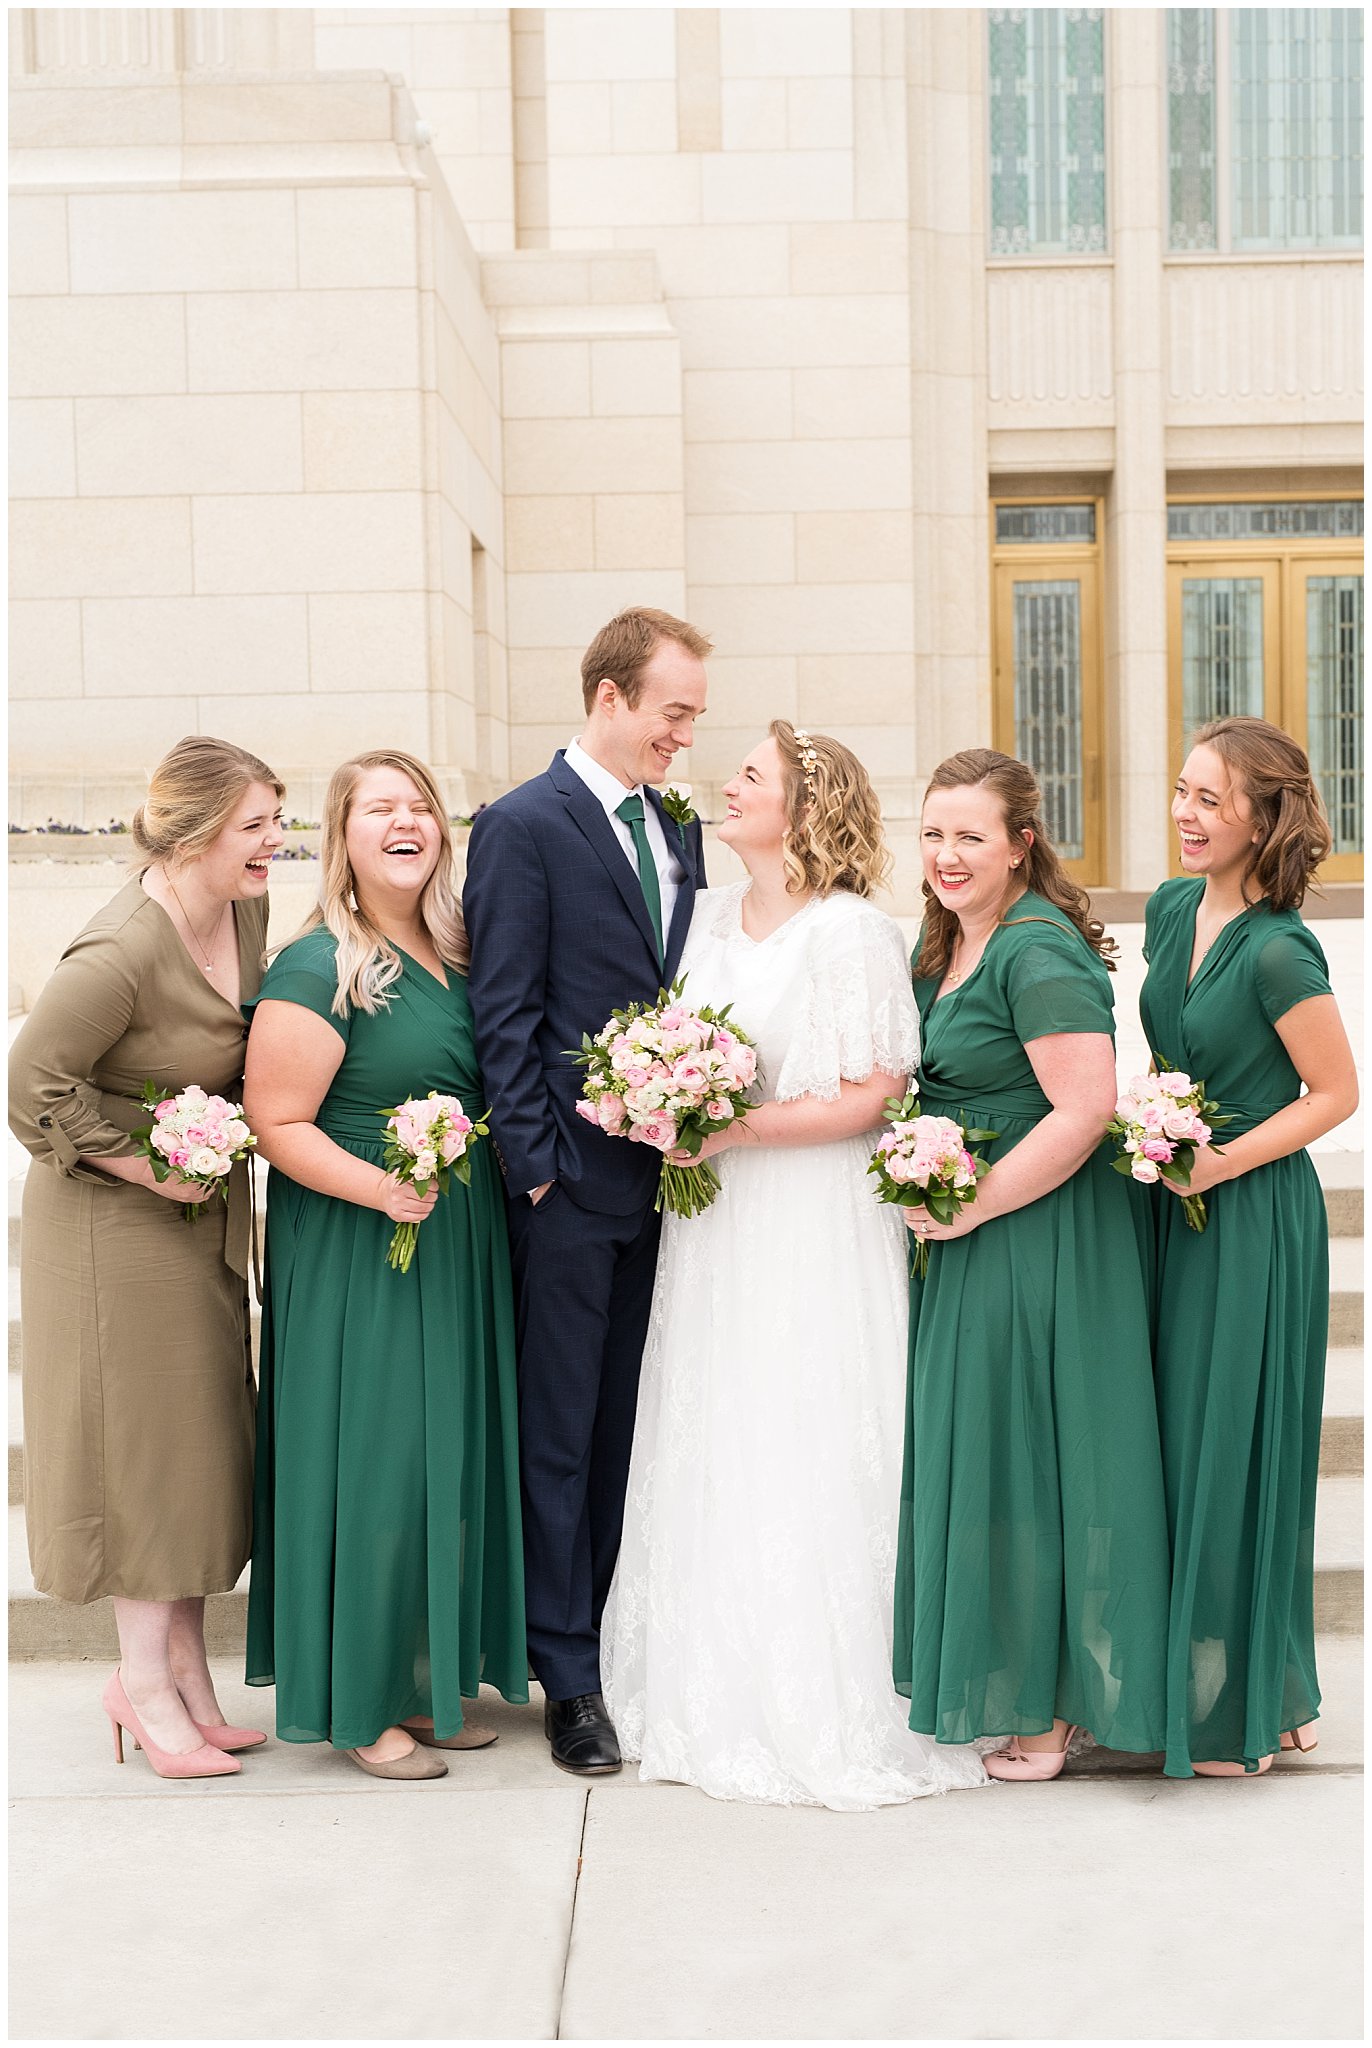 Bride and groom laughing with bridesmaids | Ogden Temple Winter Wedding | Emerald Green and Pink Wedding | Jessie and Dallin Photography